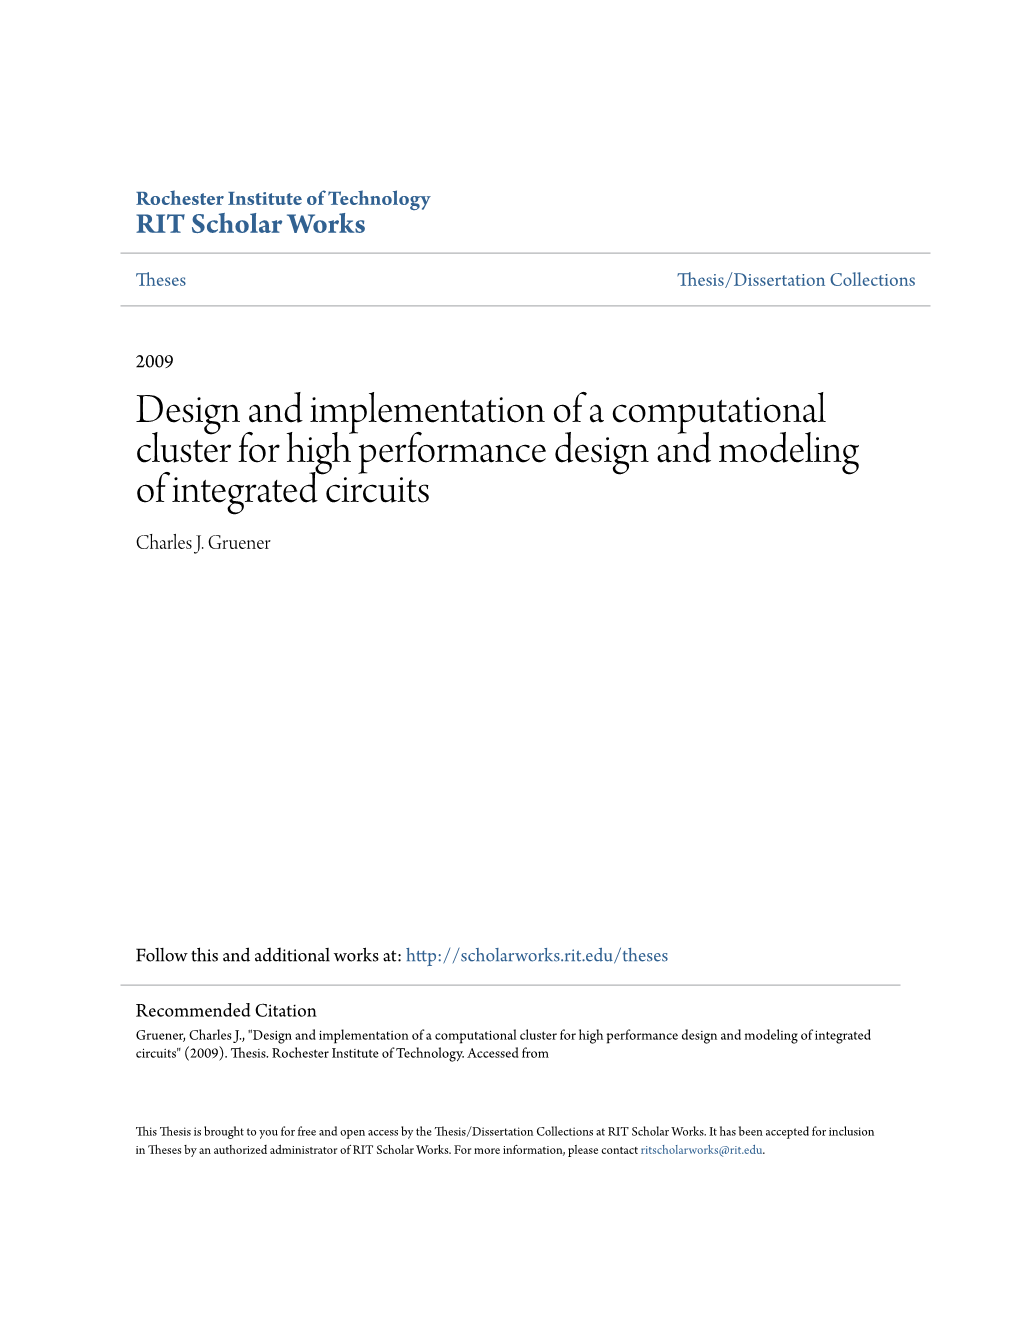 Design and Implementation of a Computational Cluster for High Performance Design and Modeling of Integrated Circuits Charles J